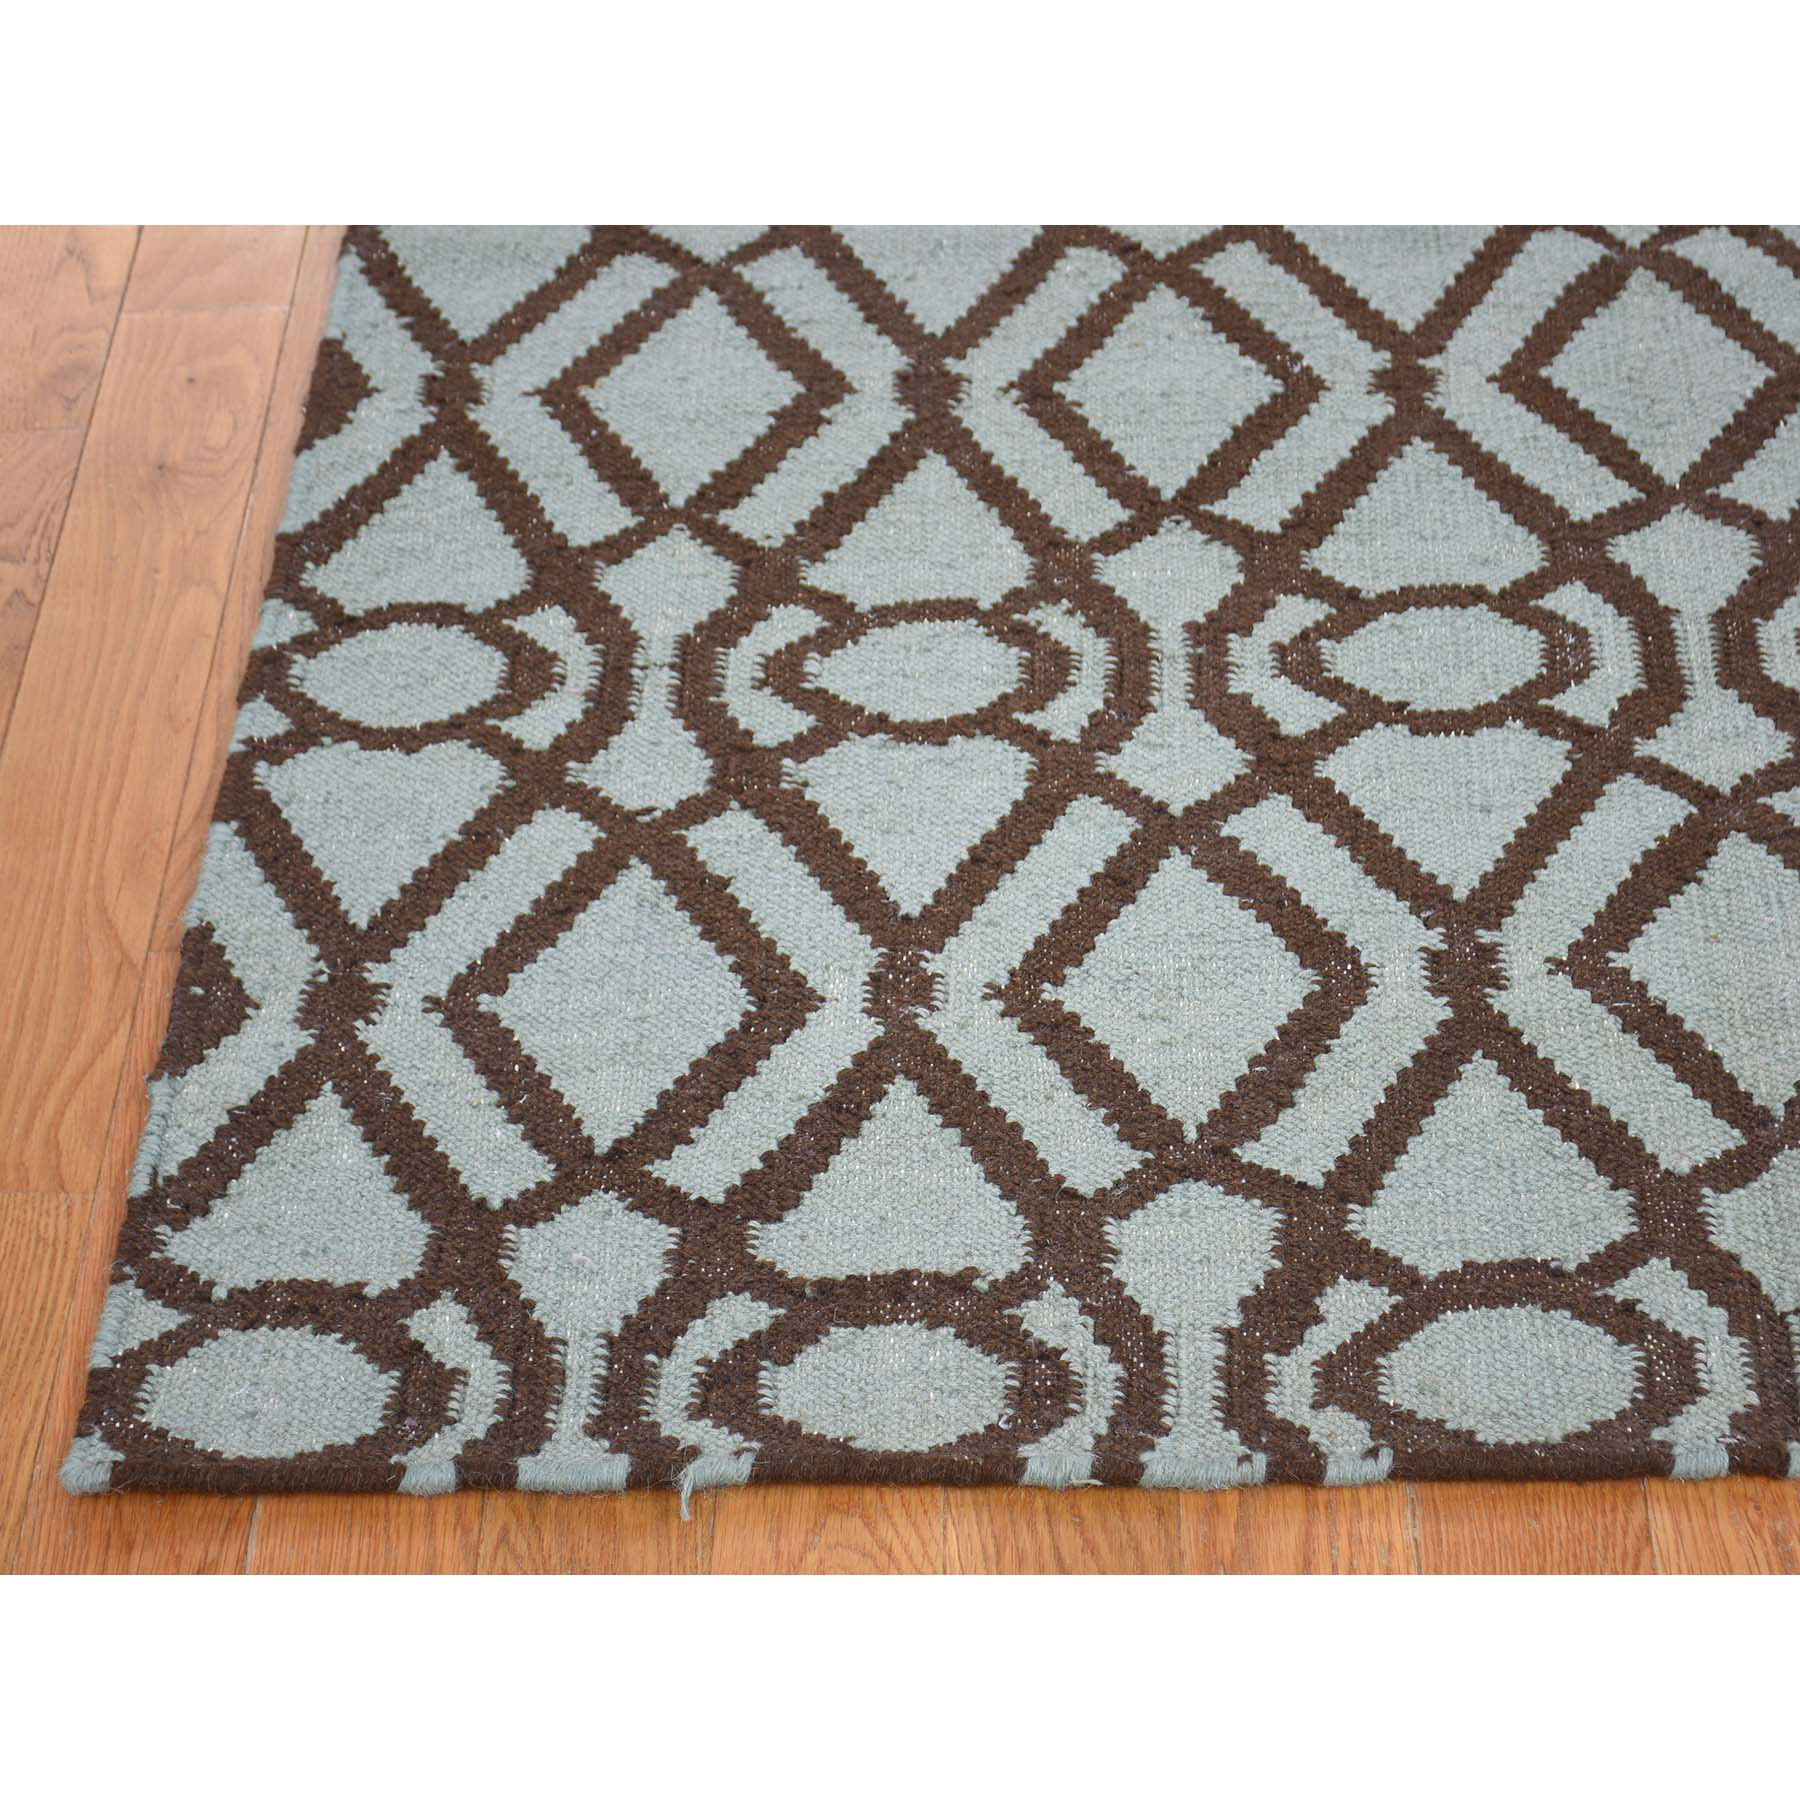 4-2--x5-10-- Pure Wool Hand Woven Grey Durie Kilim Reversible Rug 